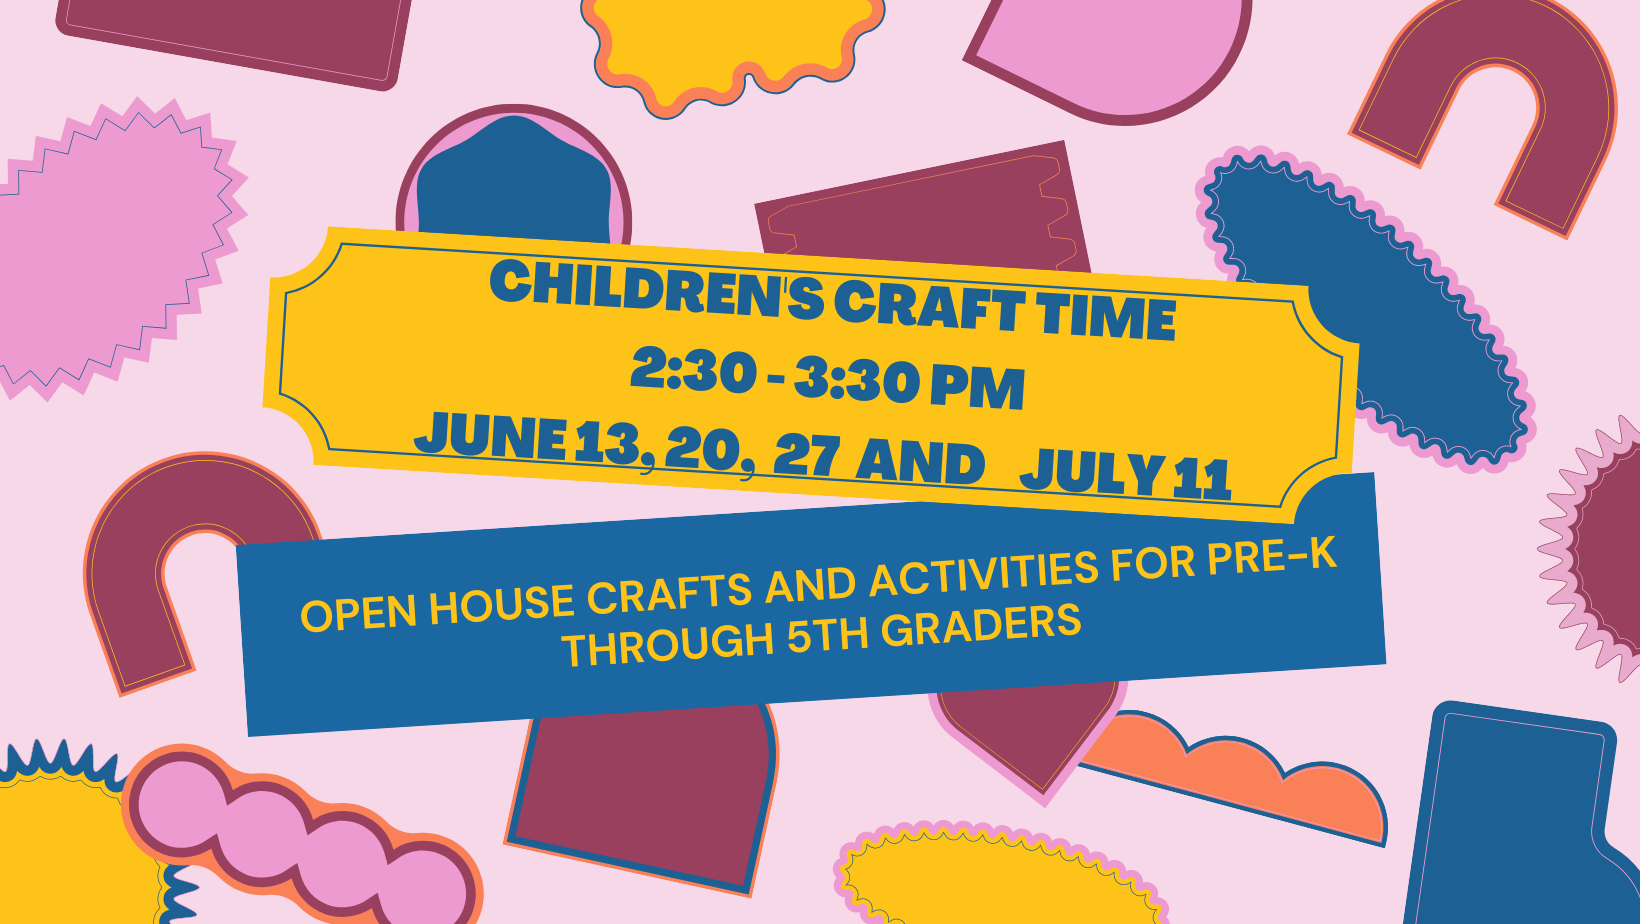 Children's Craft Time 2:30-3:30 pm June 13, 20, 27 and July 11